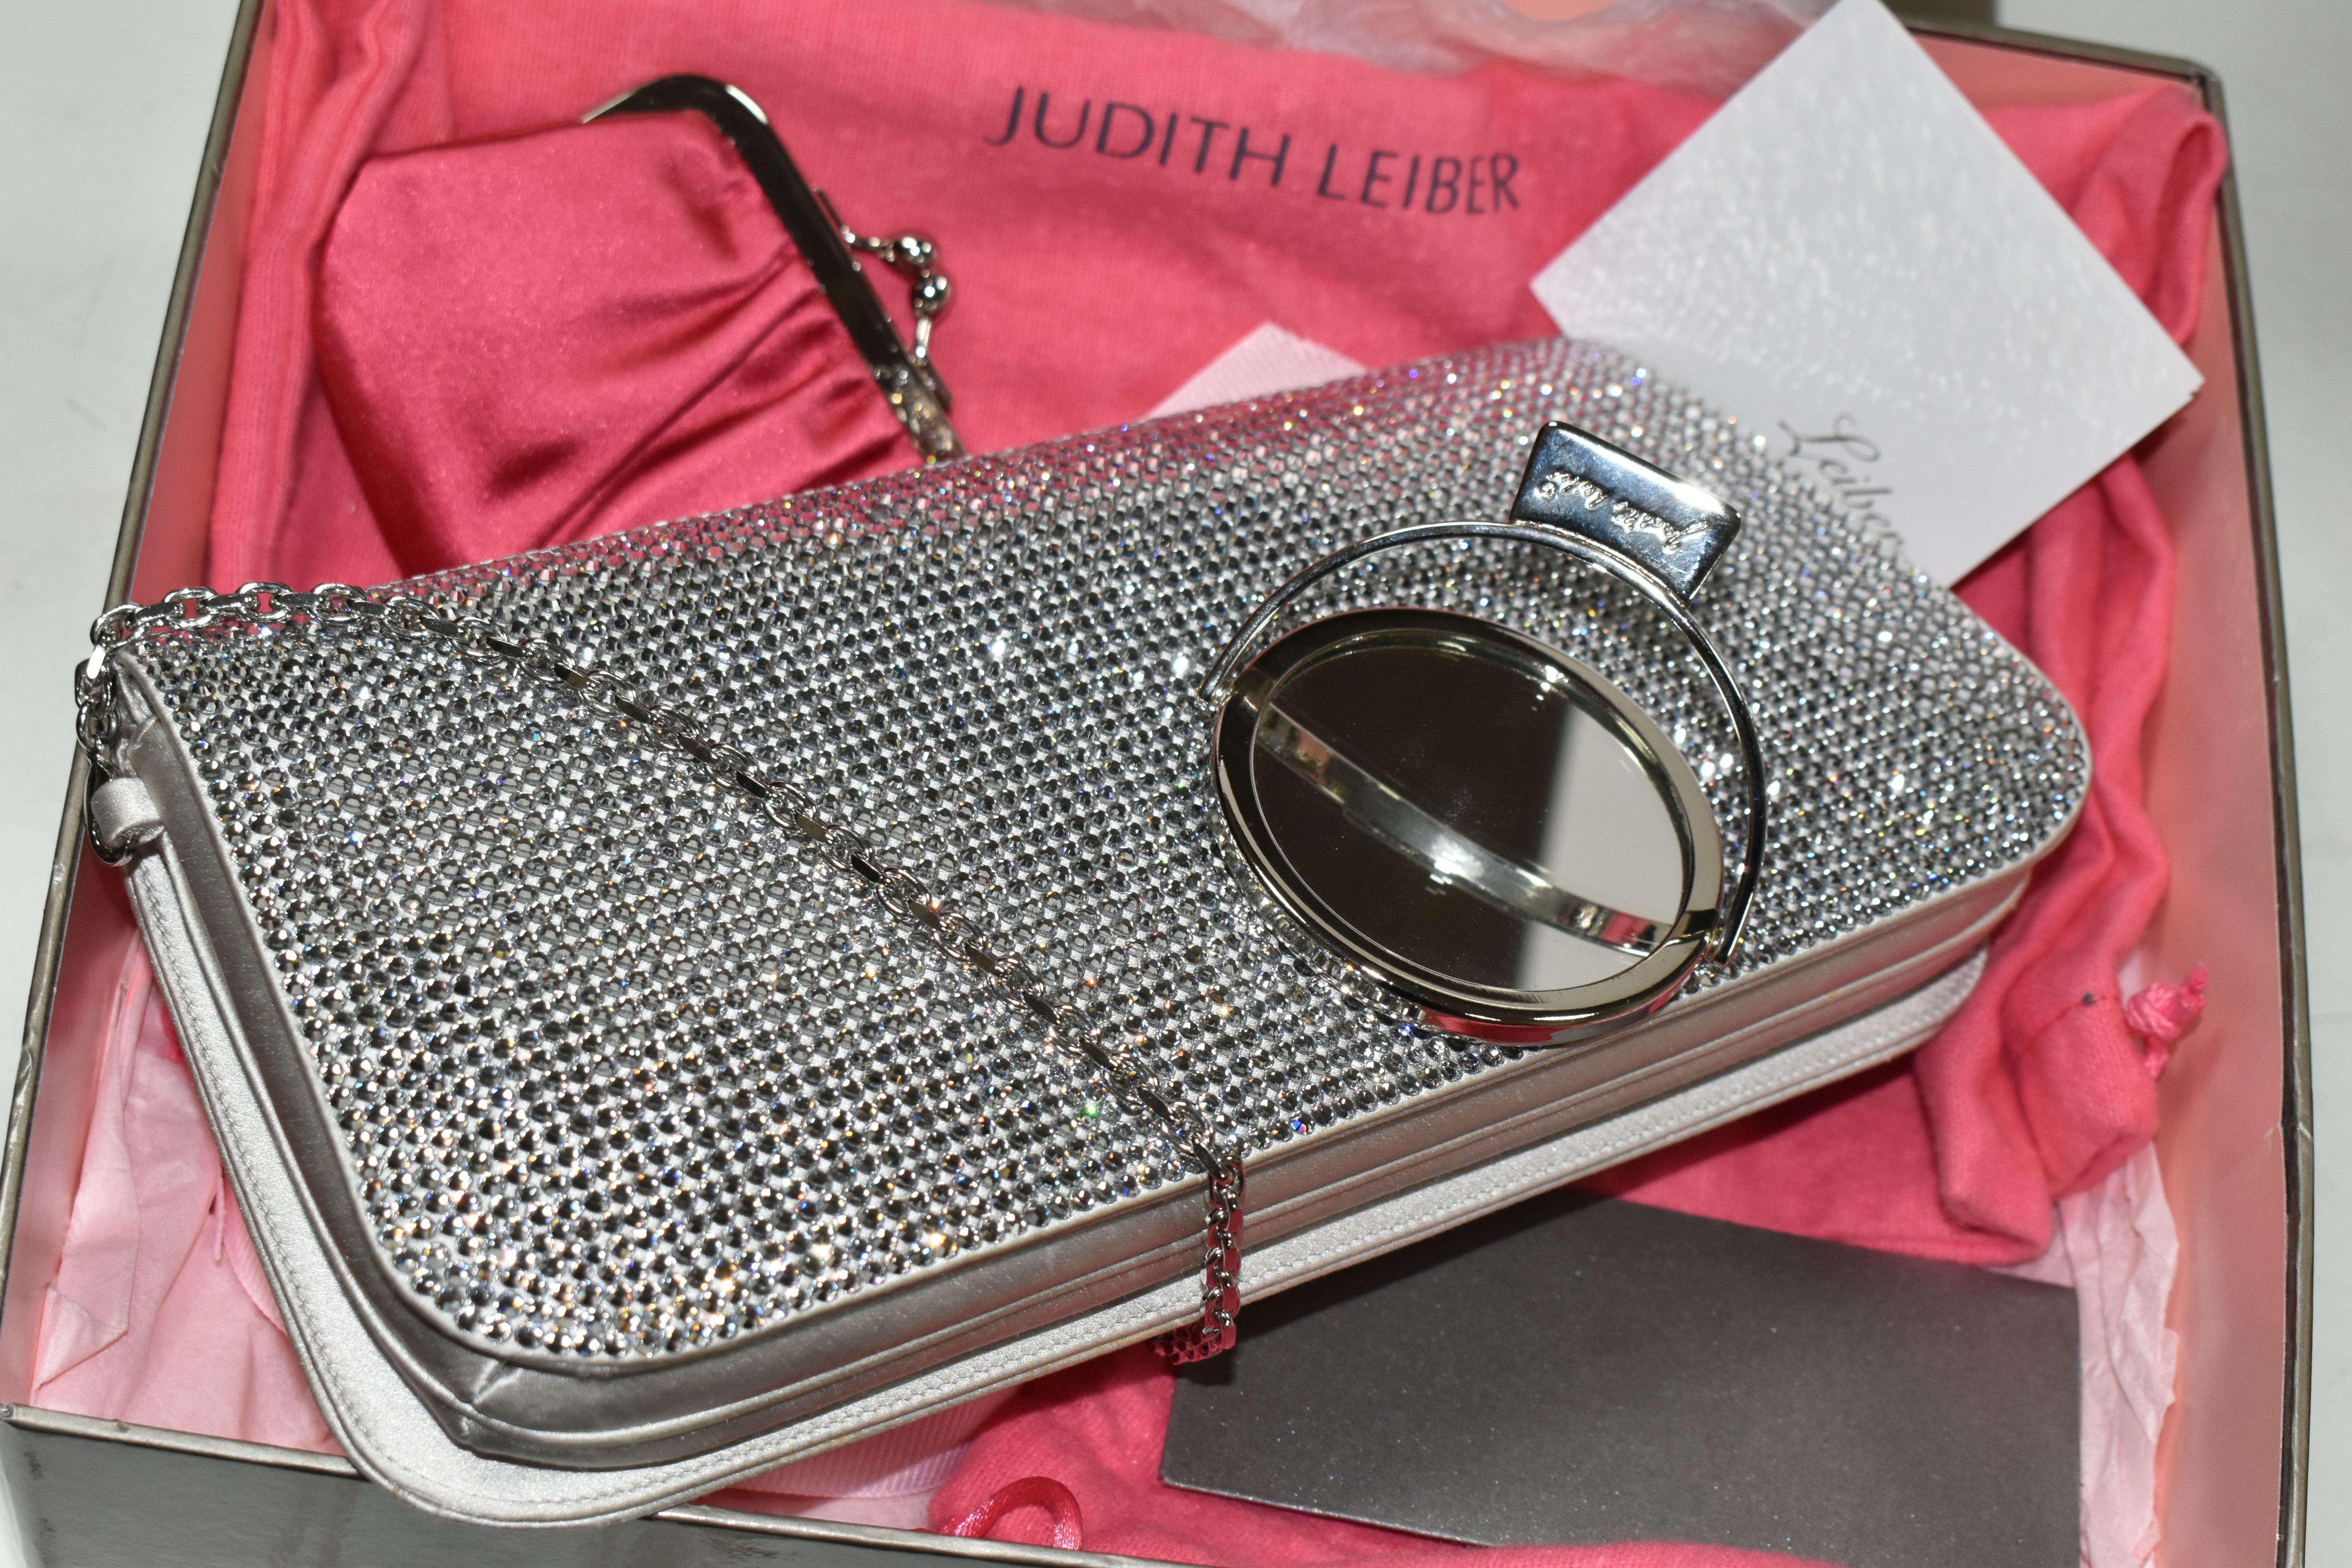 A BOXED JUDITH LEIBER DOUBLE SIDED SILVER DIAMANTE BAG, with grey satin exterior and pink satin - Image 9 of 9